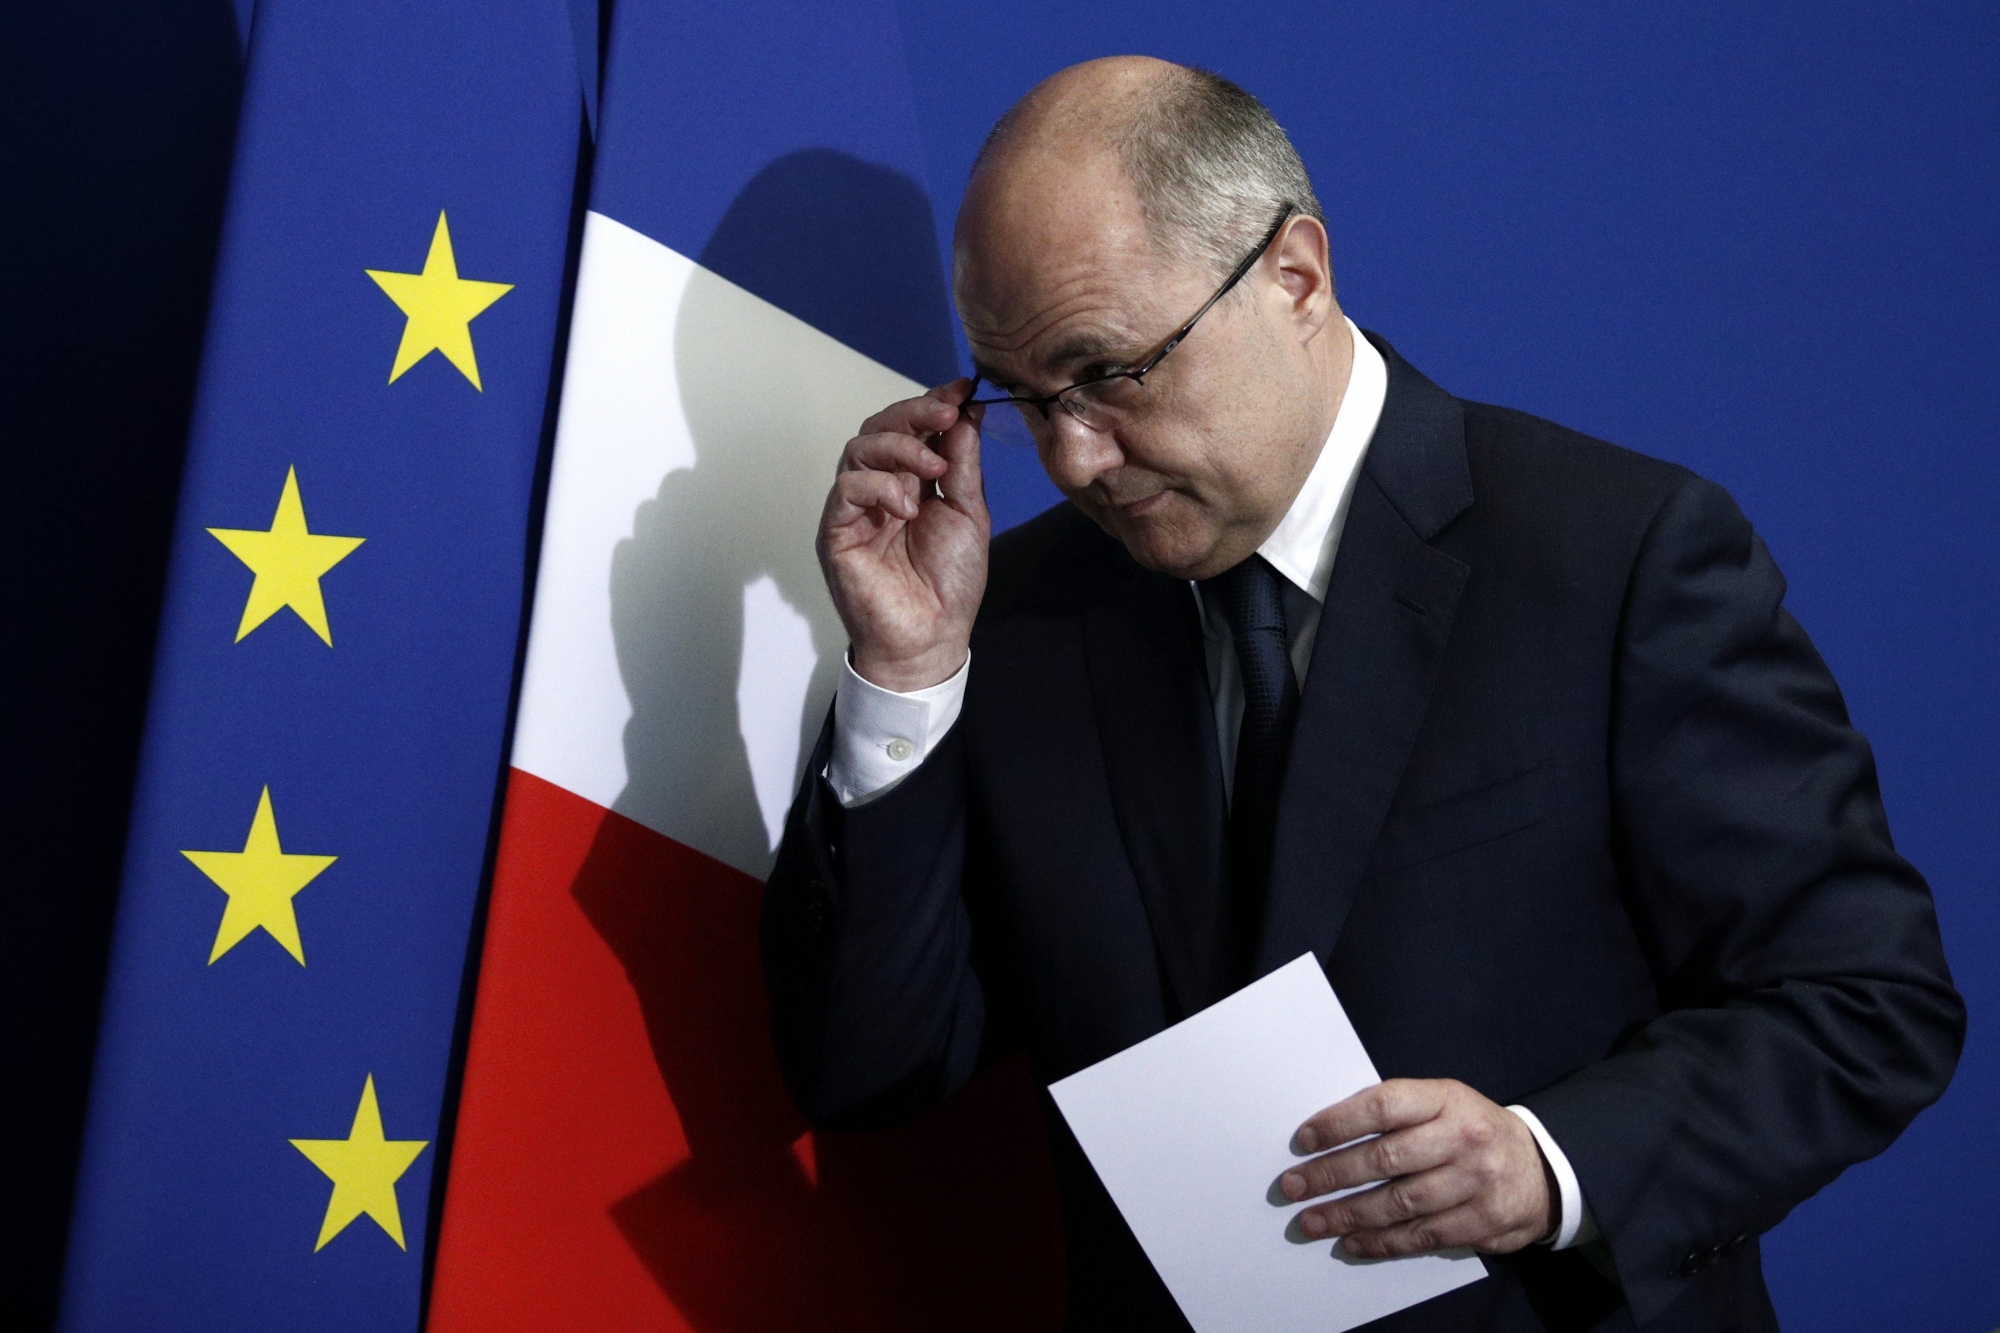 epa05862121 French Interior Minister Bruno Le Roux reacts after delivering a speech to announce his resignation at the Prefecture of Bobigny, near Paris, France, 21 March 2017. Bruno Le Roux resigned over reports he hired his two daughters as parliamentary assistants for summer jobs. A preliminary inquiry has been opened by the financial prosecutor's office on 21 March.  EPA/YOAN VALAT FRANCE POLITICS GOVERNMENT LE ROUX RESIGNATION